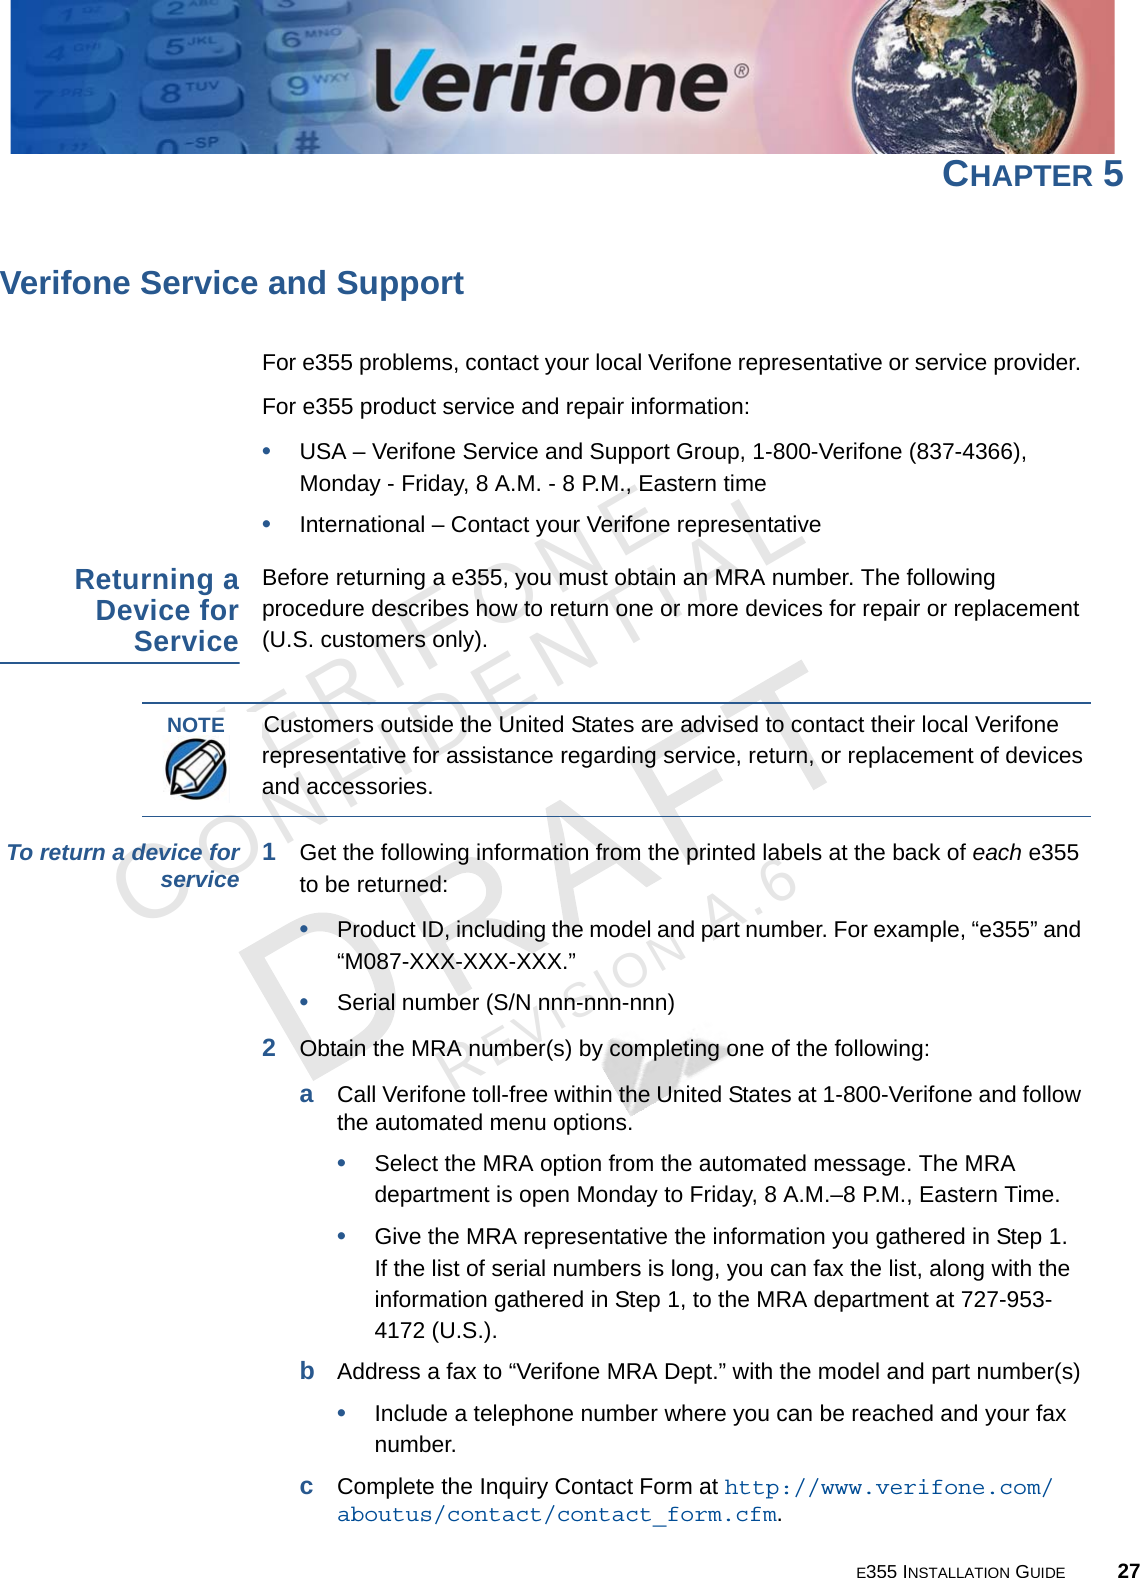 E355 INSTALLATION GUIDE 27VERIFONECONFIDENTIALREVISION A.6 CHAPTER 5Verifone Service and SupportFor e355 problems, contact your local Verifone representative or service provider. For e355 product service and repair information:•USA – Verifone Service and Support Group, 1-800-Verifone (837-4366),  Monday - Friday, 8 A.M. - 8 P.M., Eastern time•International – Contact your Verifone representative Returning a Device for ServiceBefore returning a e355, you must obtain an MRA number. The following procedure describes how to return one or more devices for repair or replacement (U.S. customers only). To return a device for service 1Get the following information from the printed labels at the back of each e355 to be returned:•Product ID, including the model and part number. For example, “e355” and “M087-XXX-XXX-XXX.”•Serial number (S/N nnn-nnn-nnn)2Obtain the MRA number(s) by completing one of the following:aCall Verifone toll-free within the United States at 1-800-Verifone and follow the automated menu options.•Select the MRA option from the automated message. The MRA department is open Monday to Friday, 8 A.M.–8 P.M., Eastern Time.•Give the MRA representative the information you gathered in Step 1. If the list of serial numbers is long, you can fax the list, along with the information gathered in Step 1, to the MRA department at 727-953-4172 (U.S.).bAddress a fax to “Verifone MRA Dept.” with the model and part number(s)•Include a telephone number where you can be reached and your fax number.cComplete the Inquiry Contact Form at http://www.verifone.com/aboutus/contact/contact_form.cfm.NOTECustomers outside the United States are advised to contact their local Verifone representative for assistance regarding service, return, or replacement of devices and accessories.